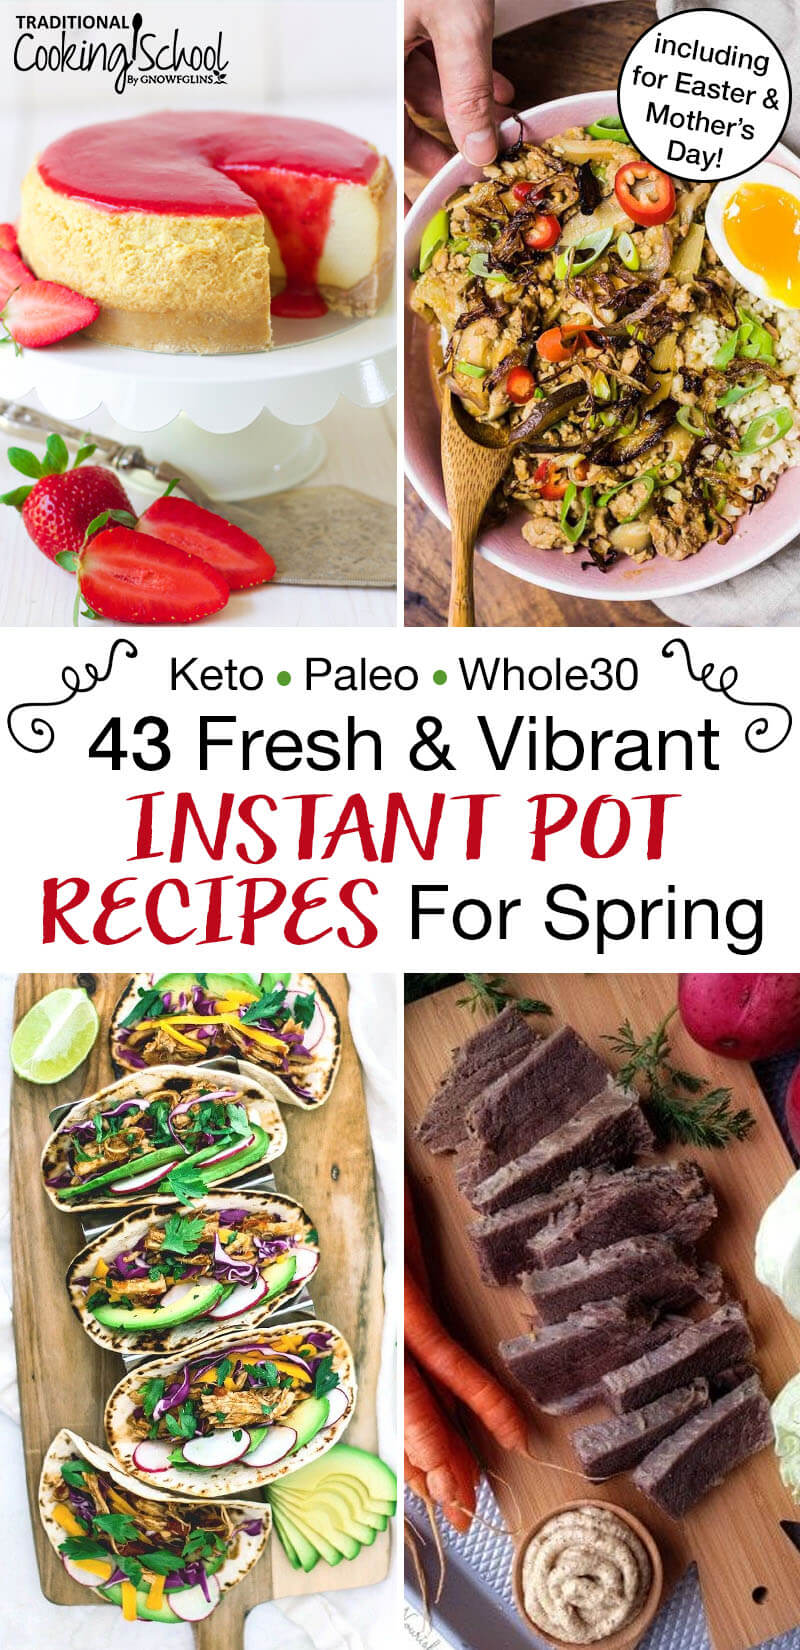 photo collage of spring-inspired pressure cooker recipes, with text overlay: "42 Fresh & Vibrant Instant Pot Recipes For Spring (Keto, Paleo, & Whole30, including for Easter & Mother's Day)"